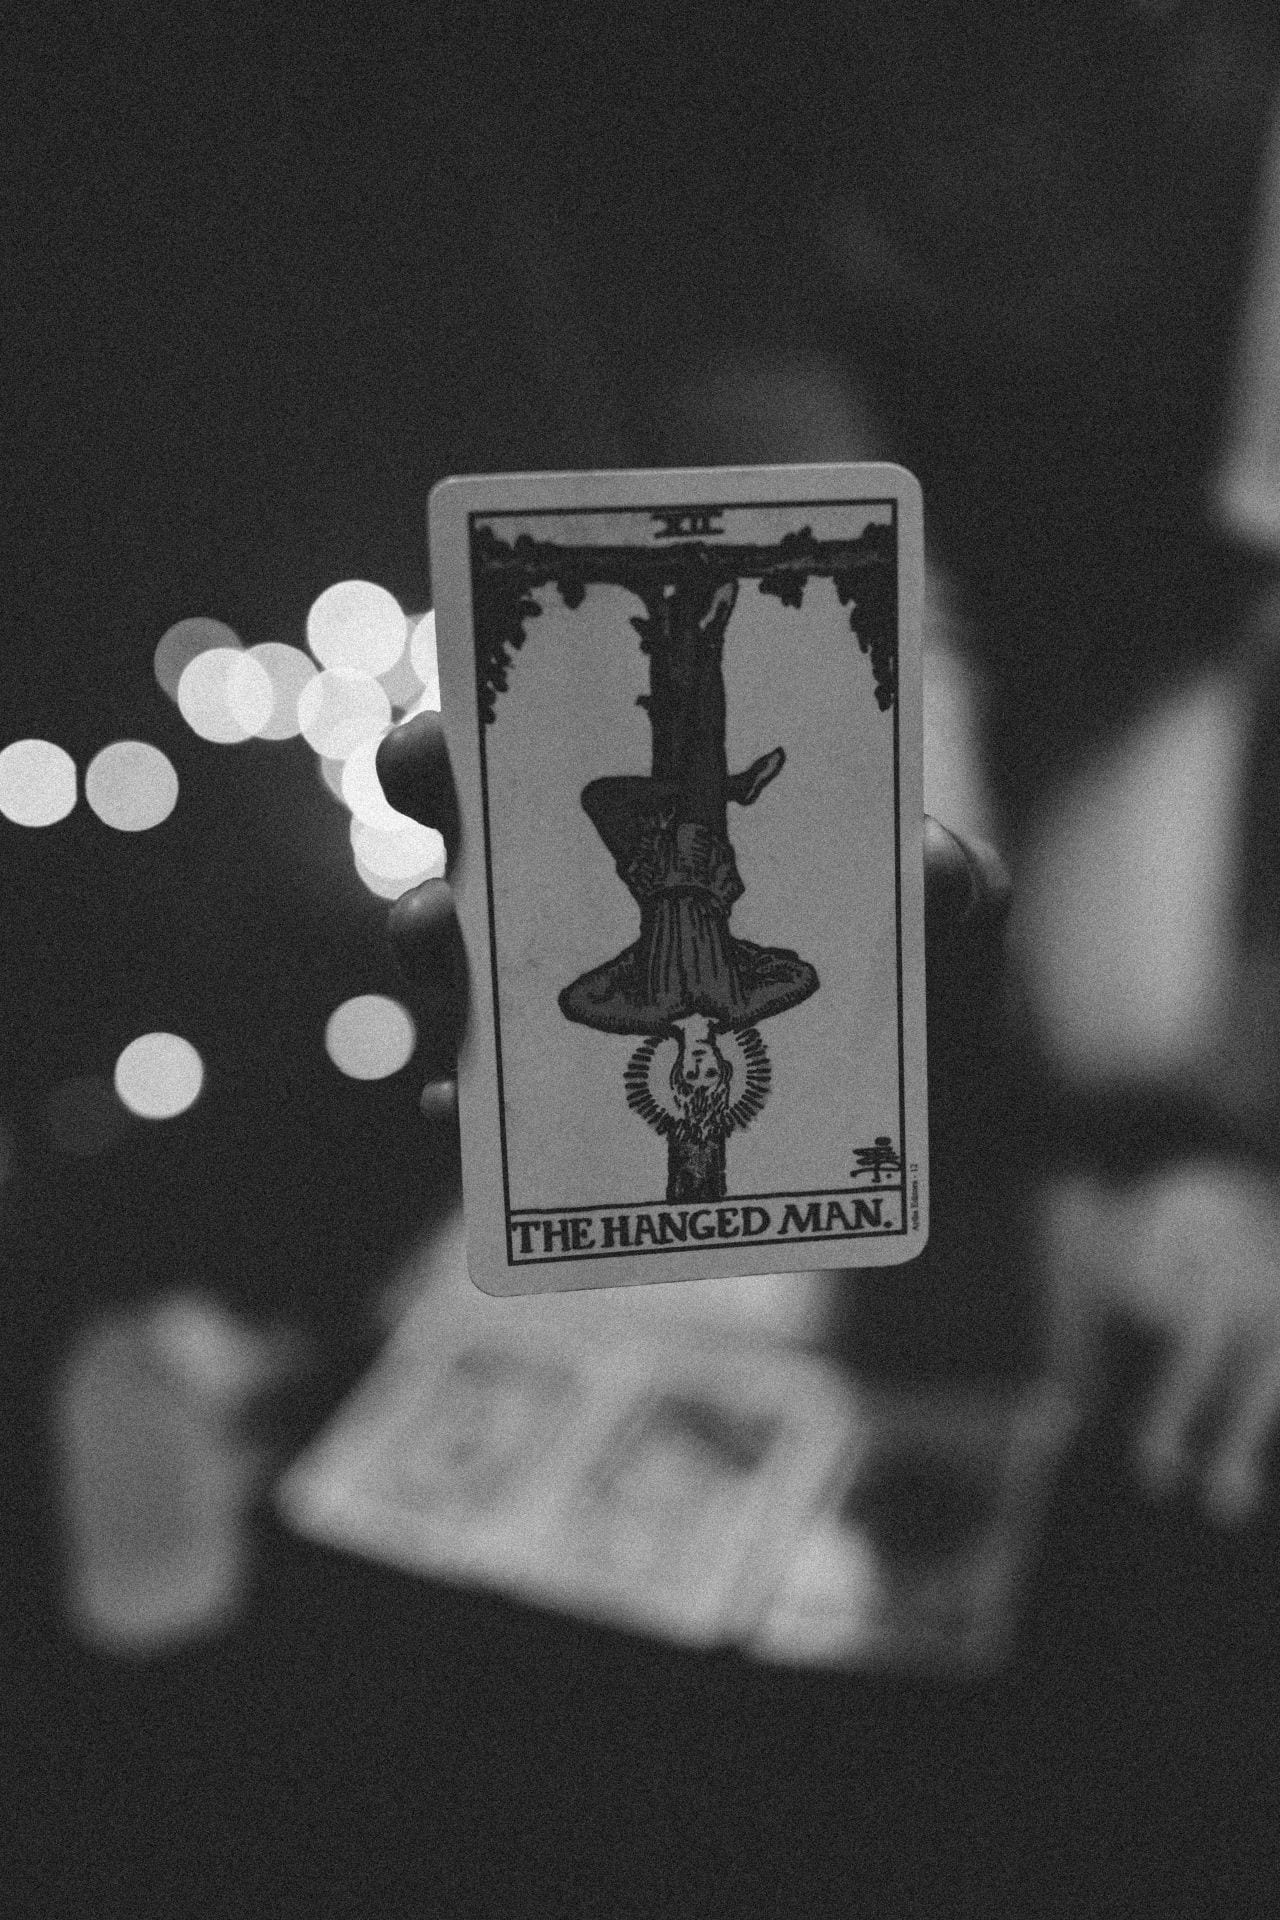 Black and white tarot card depicting the hanged man.